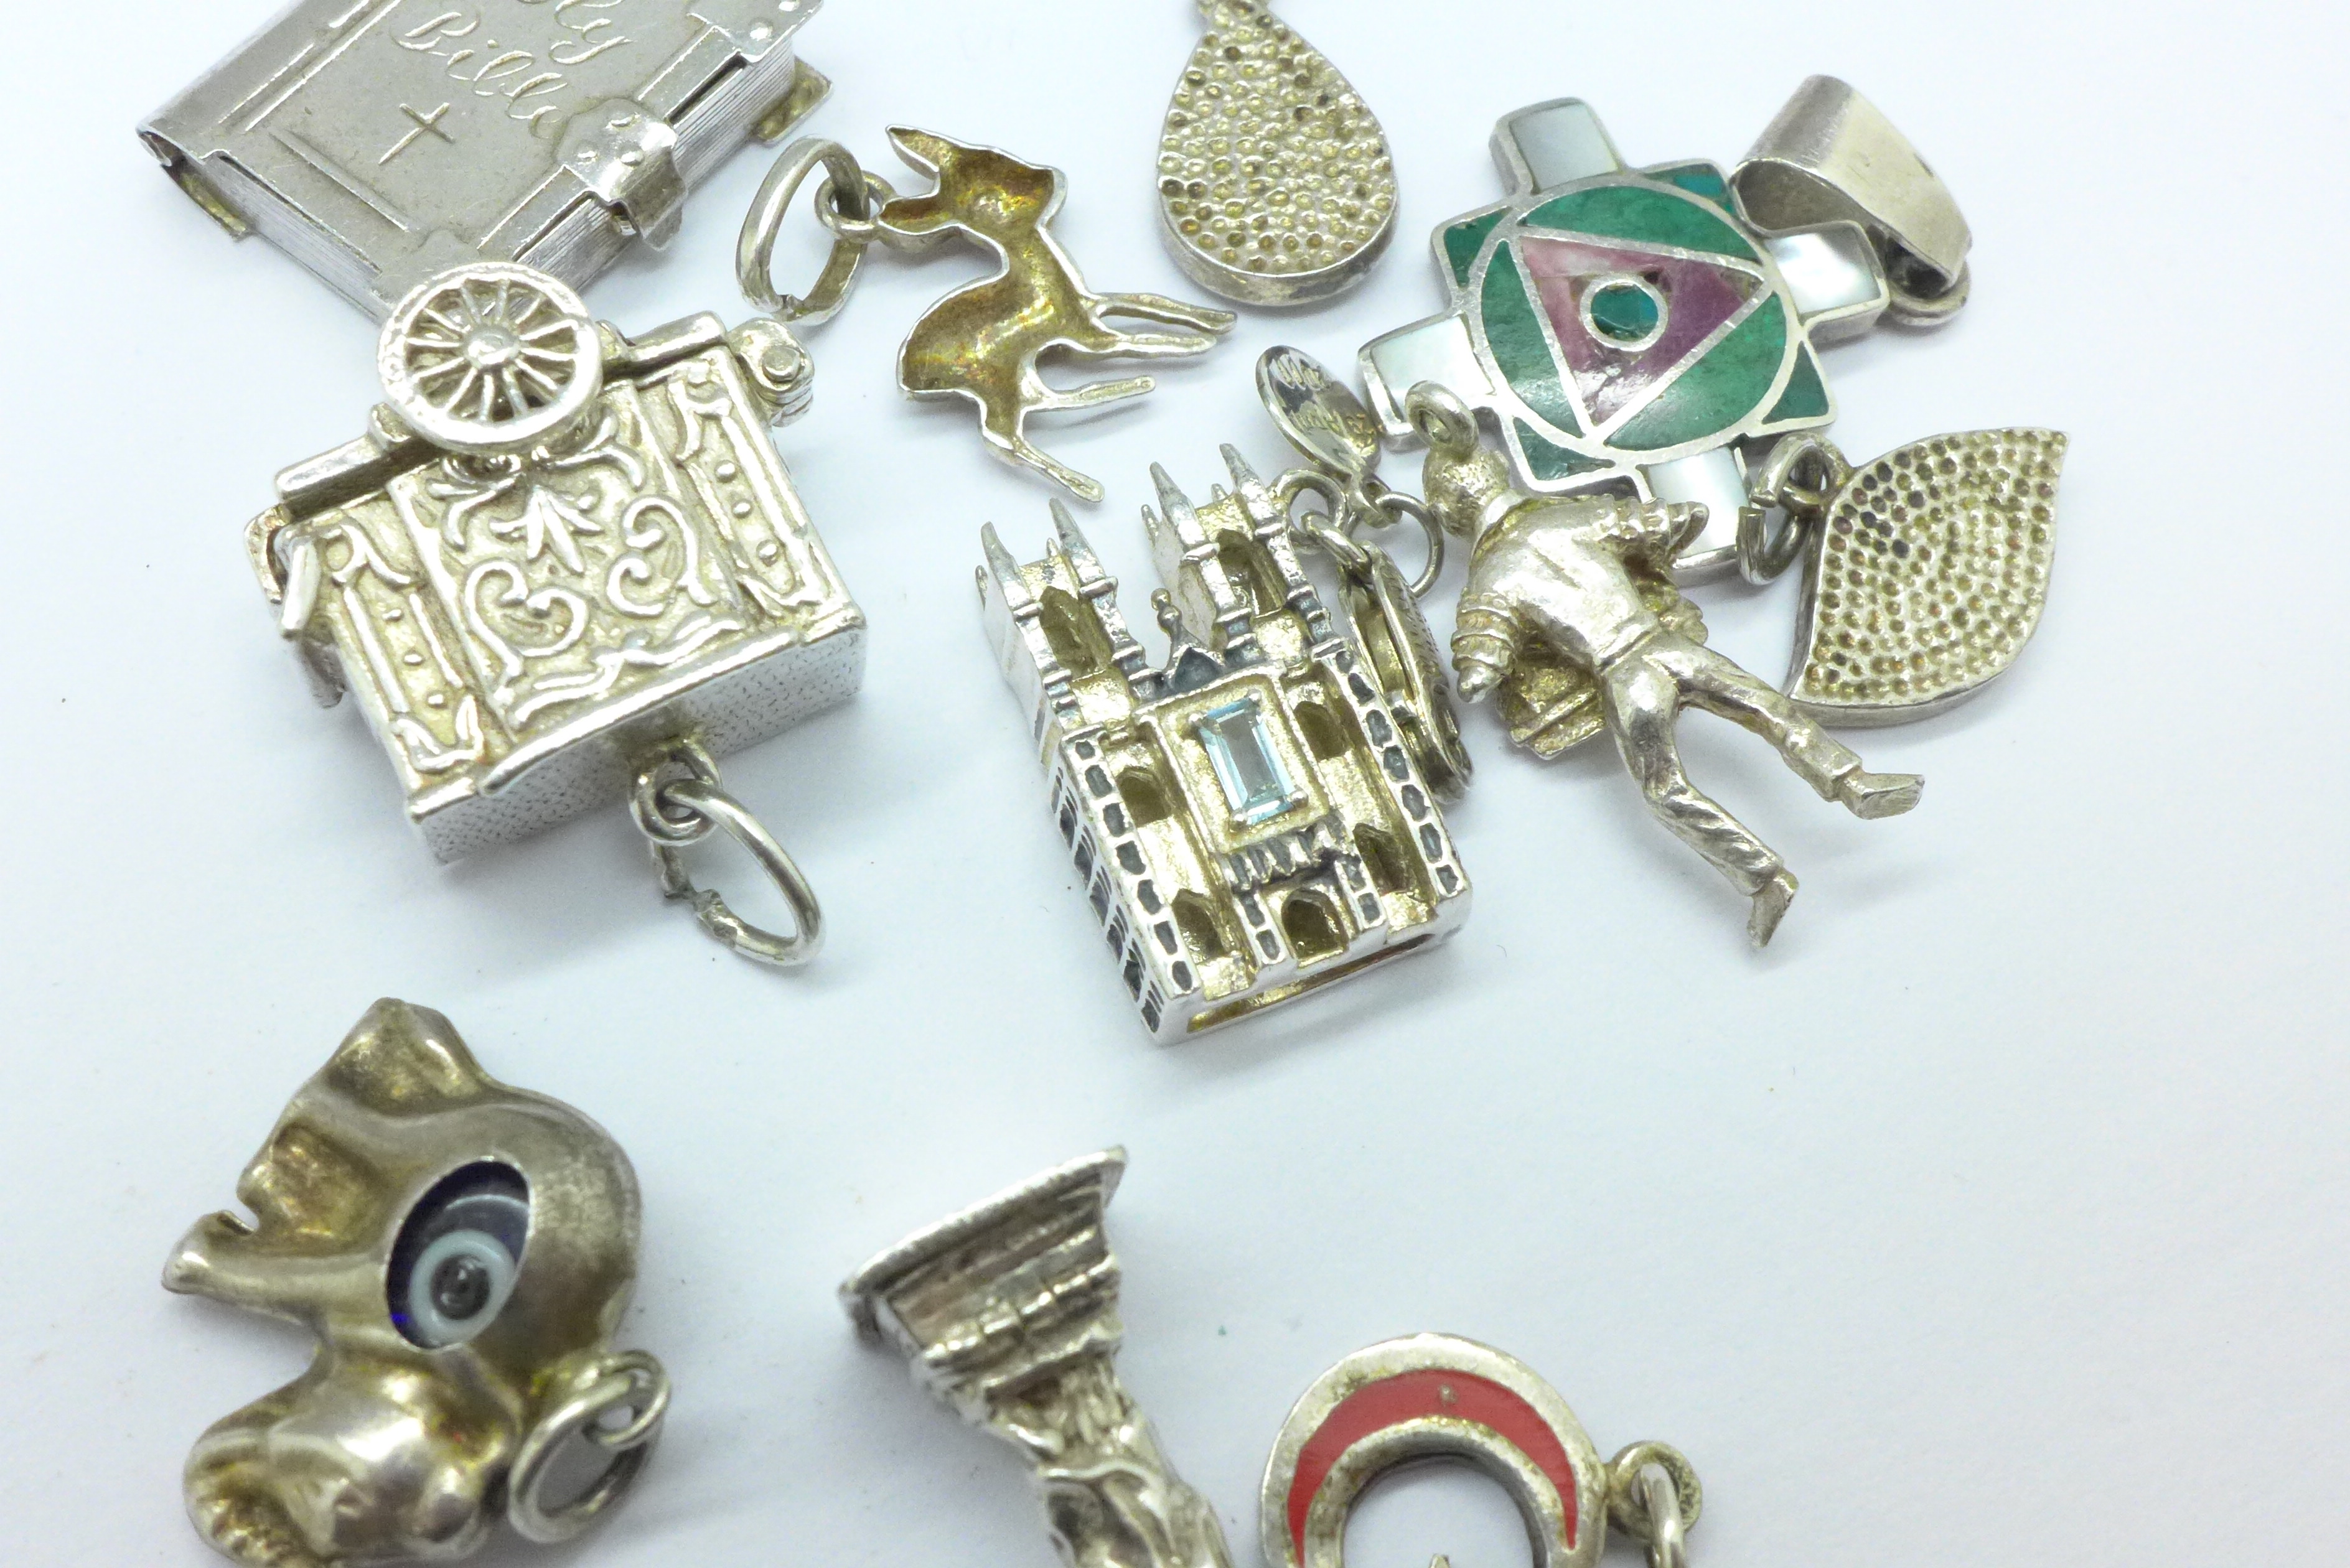 Four bank note charms and other charms including Statue of Liberty - Image 2 of 2